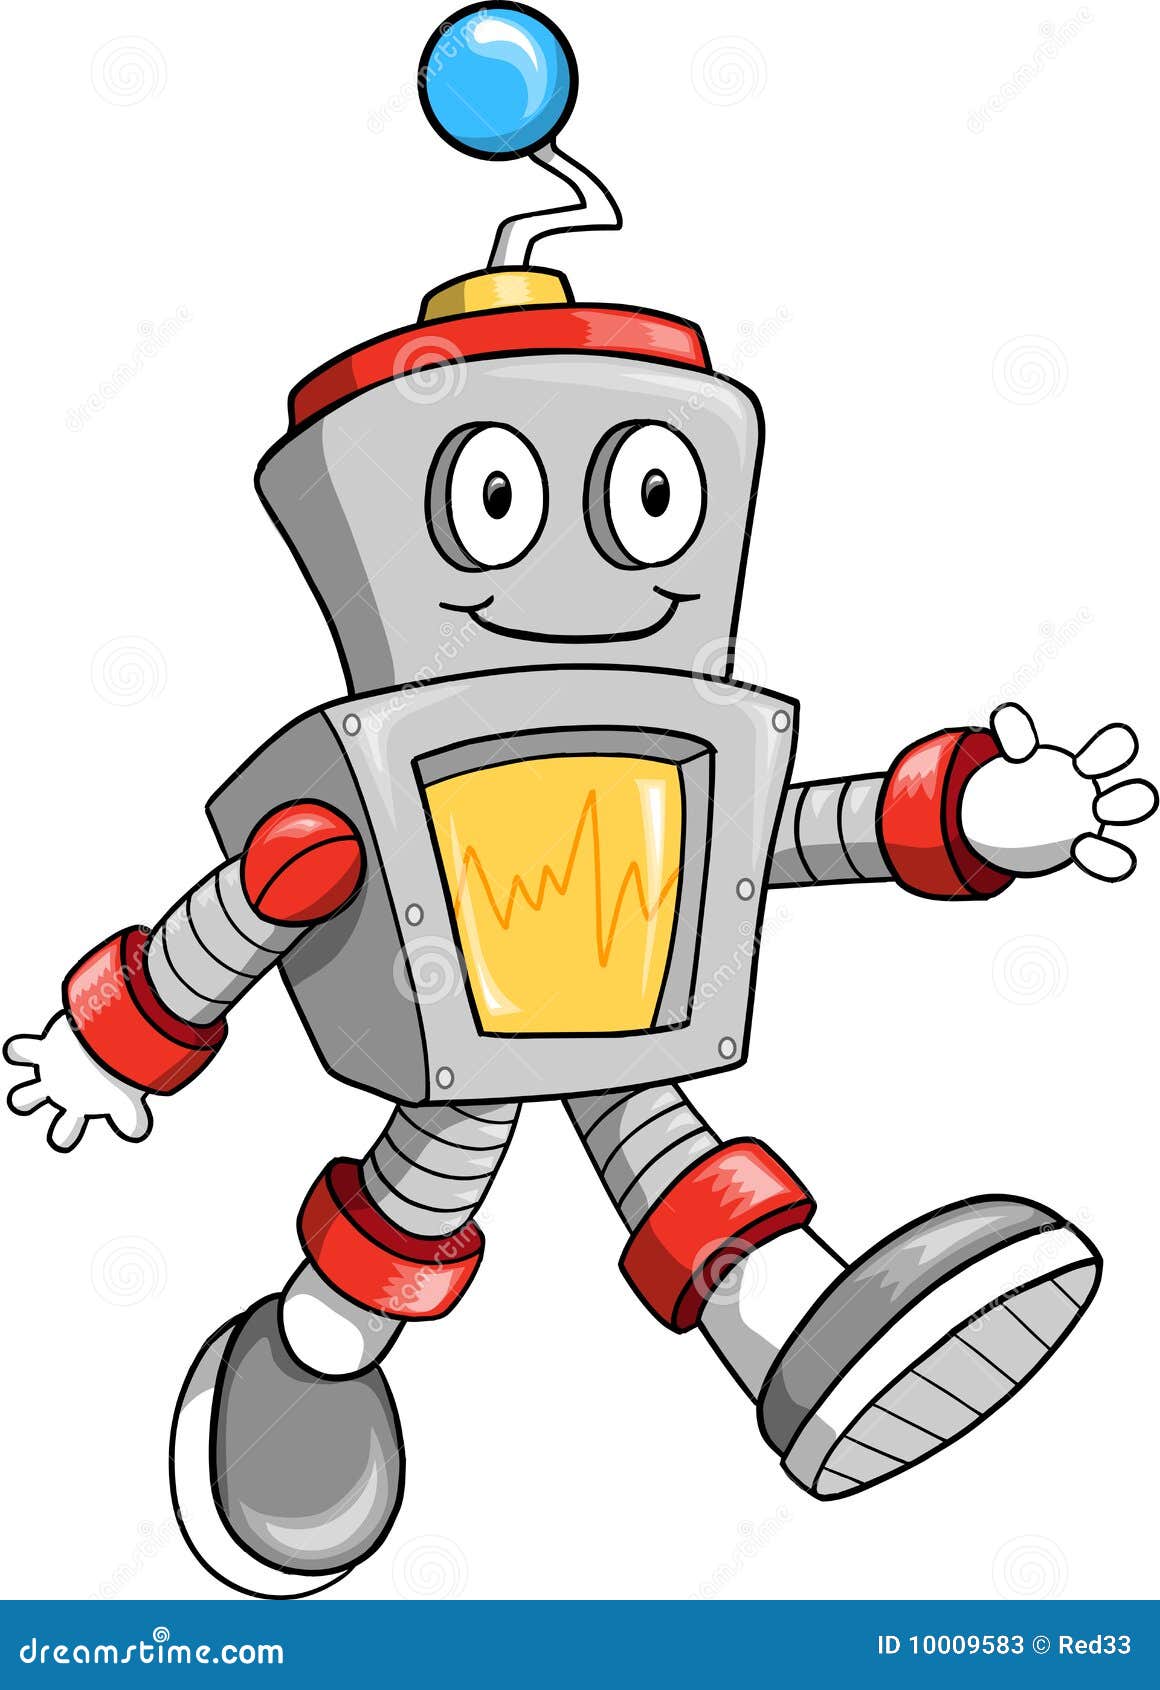 robot mouth clipart - photo #40